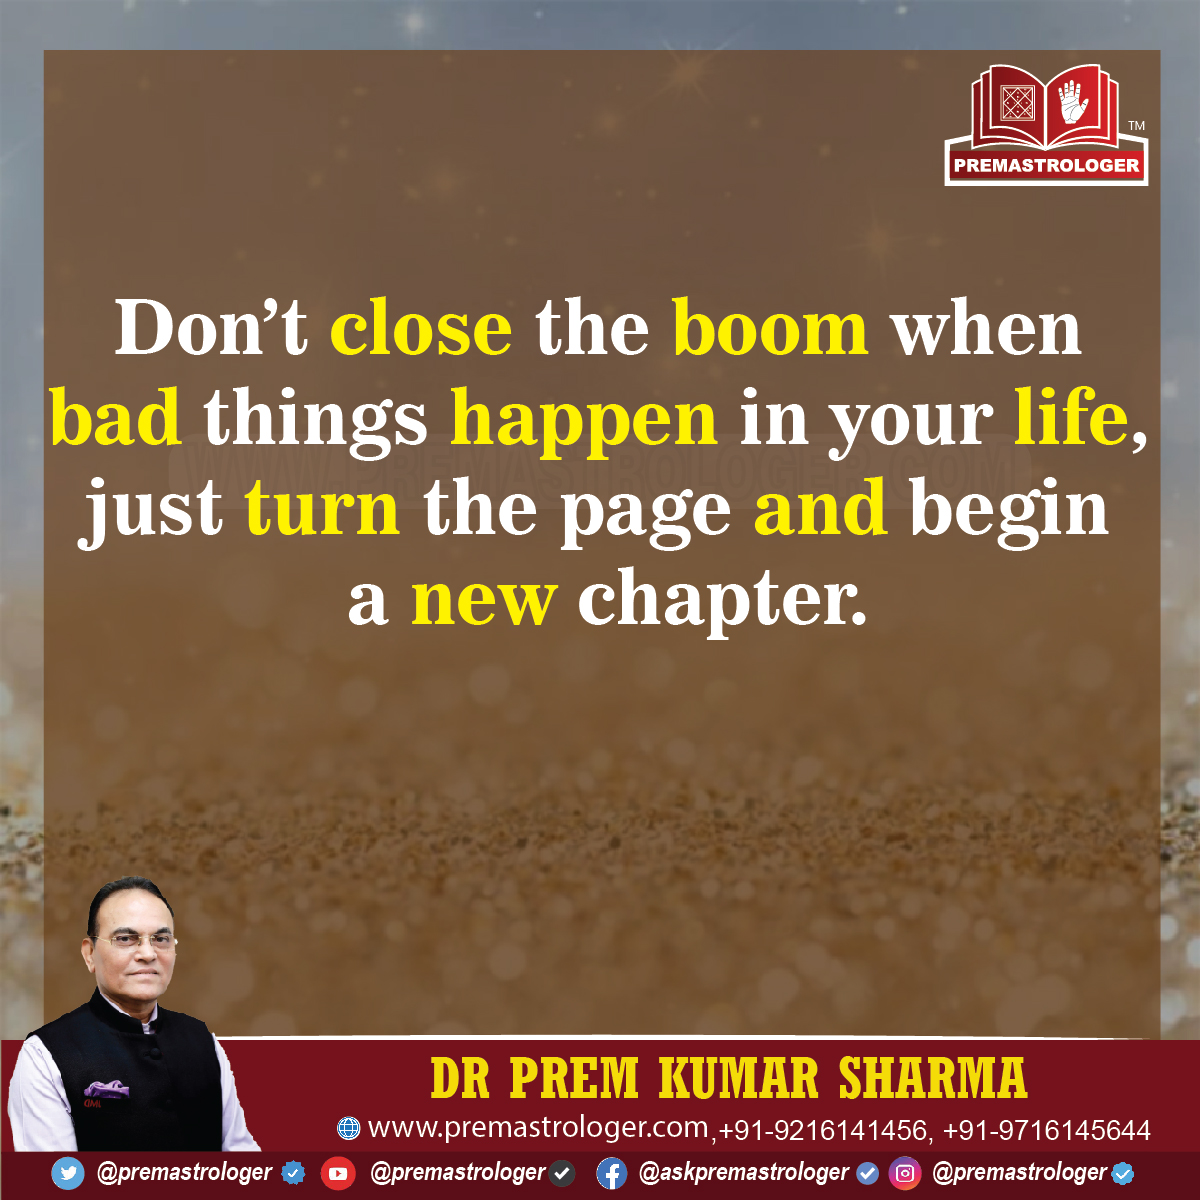 'Don’t close the boom when bad things happen in your life, just turn the page and begin a new chapter'.

#GoodmorningTwitter
#सुप्रभात 
#Thursdaymorninglive
#ThursdayVibes 
#Thursdaymotivations
#Thursdaymorning 
#ThursdayThoughts